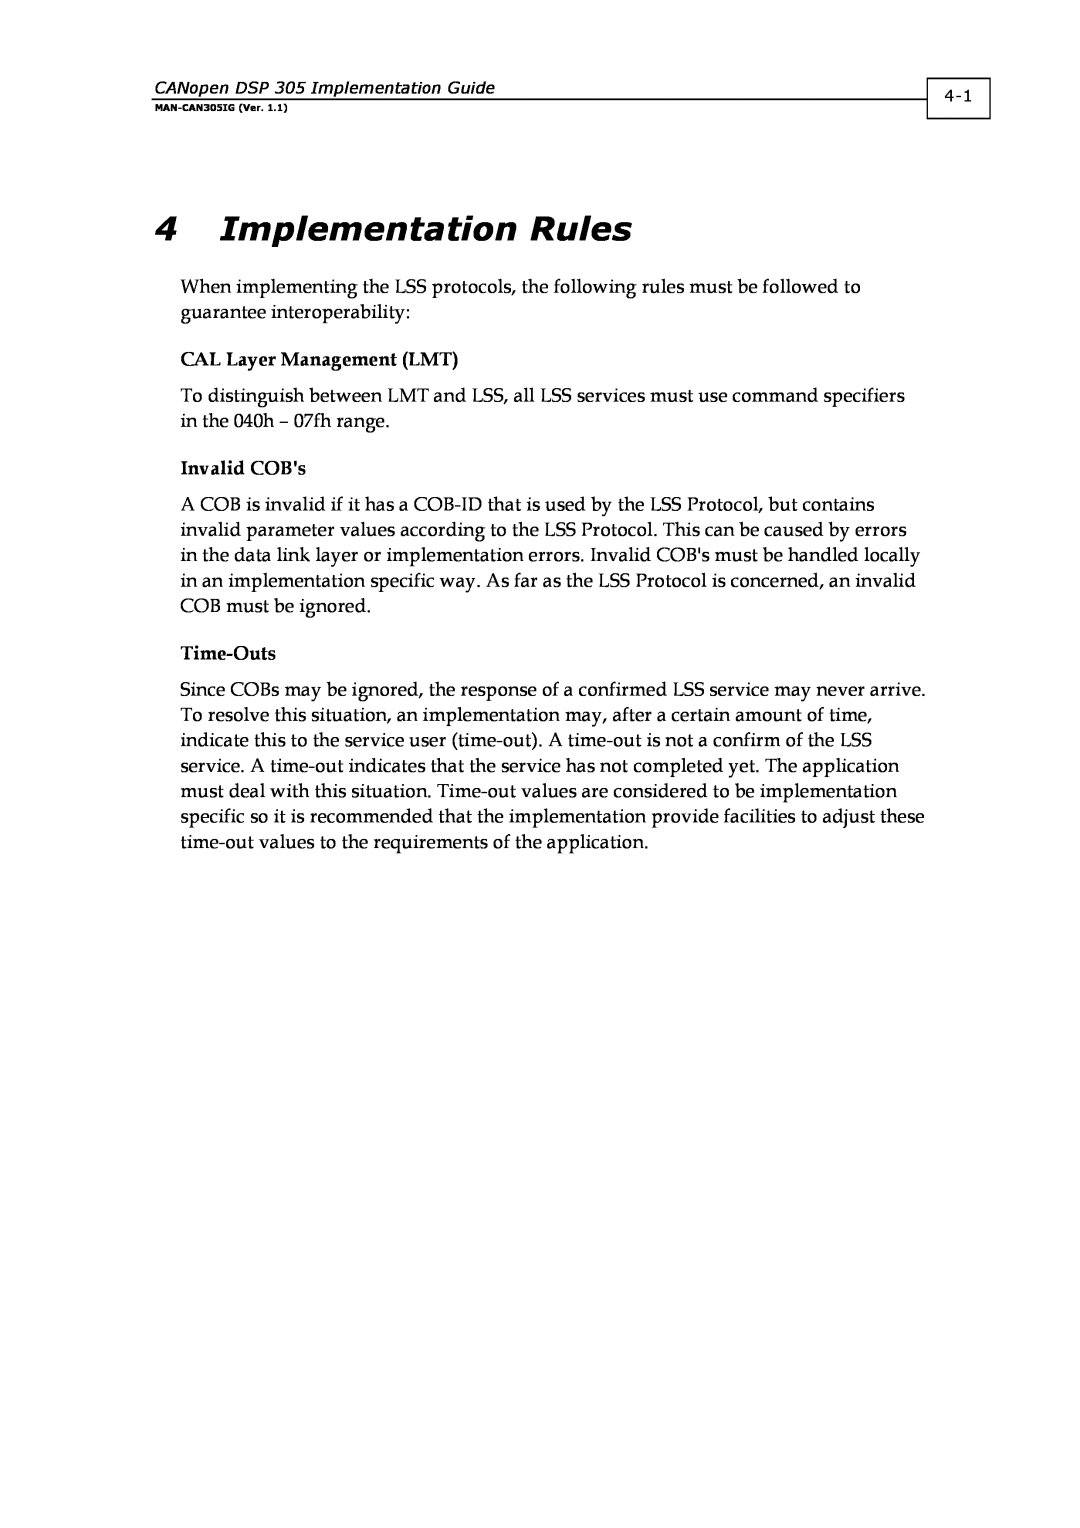 Elmo DSP 305 manual Implementation Rules, CAL Layer Management LMT, Invalid COBs, Time-Outs 